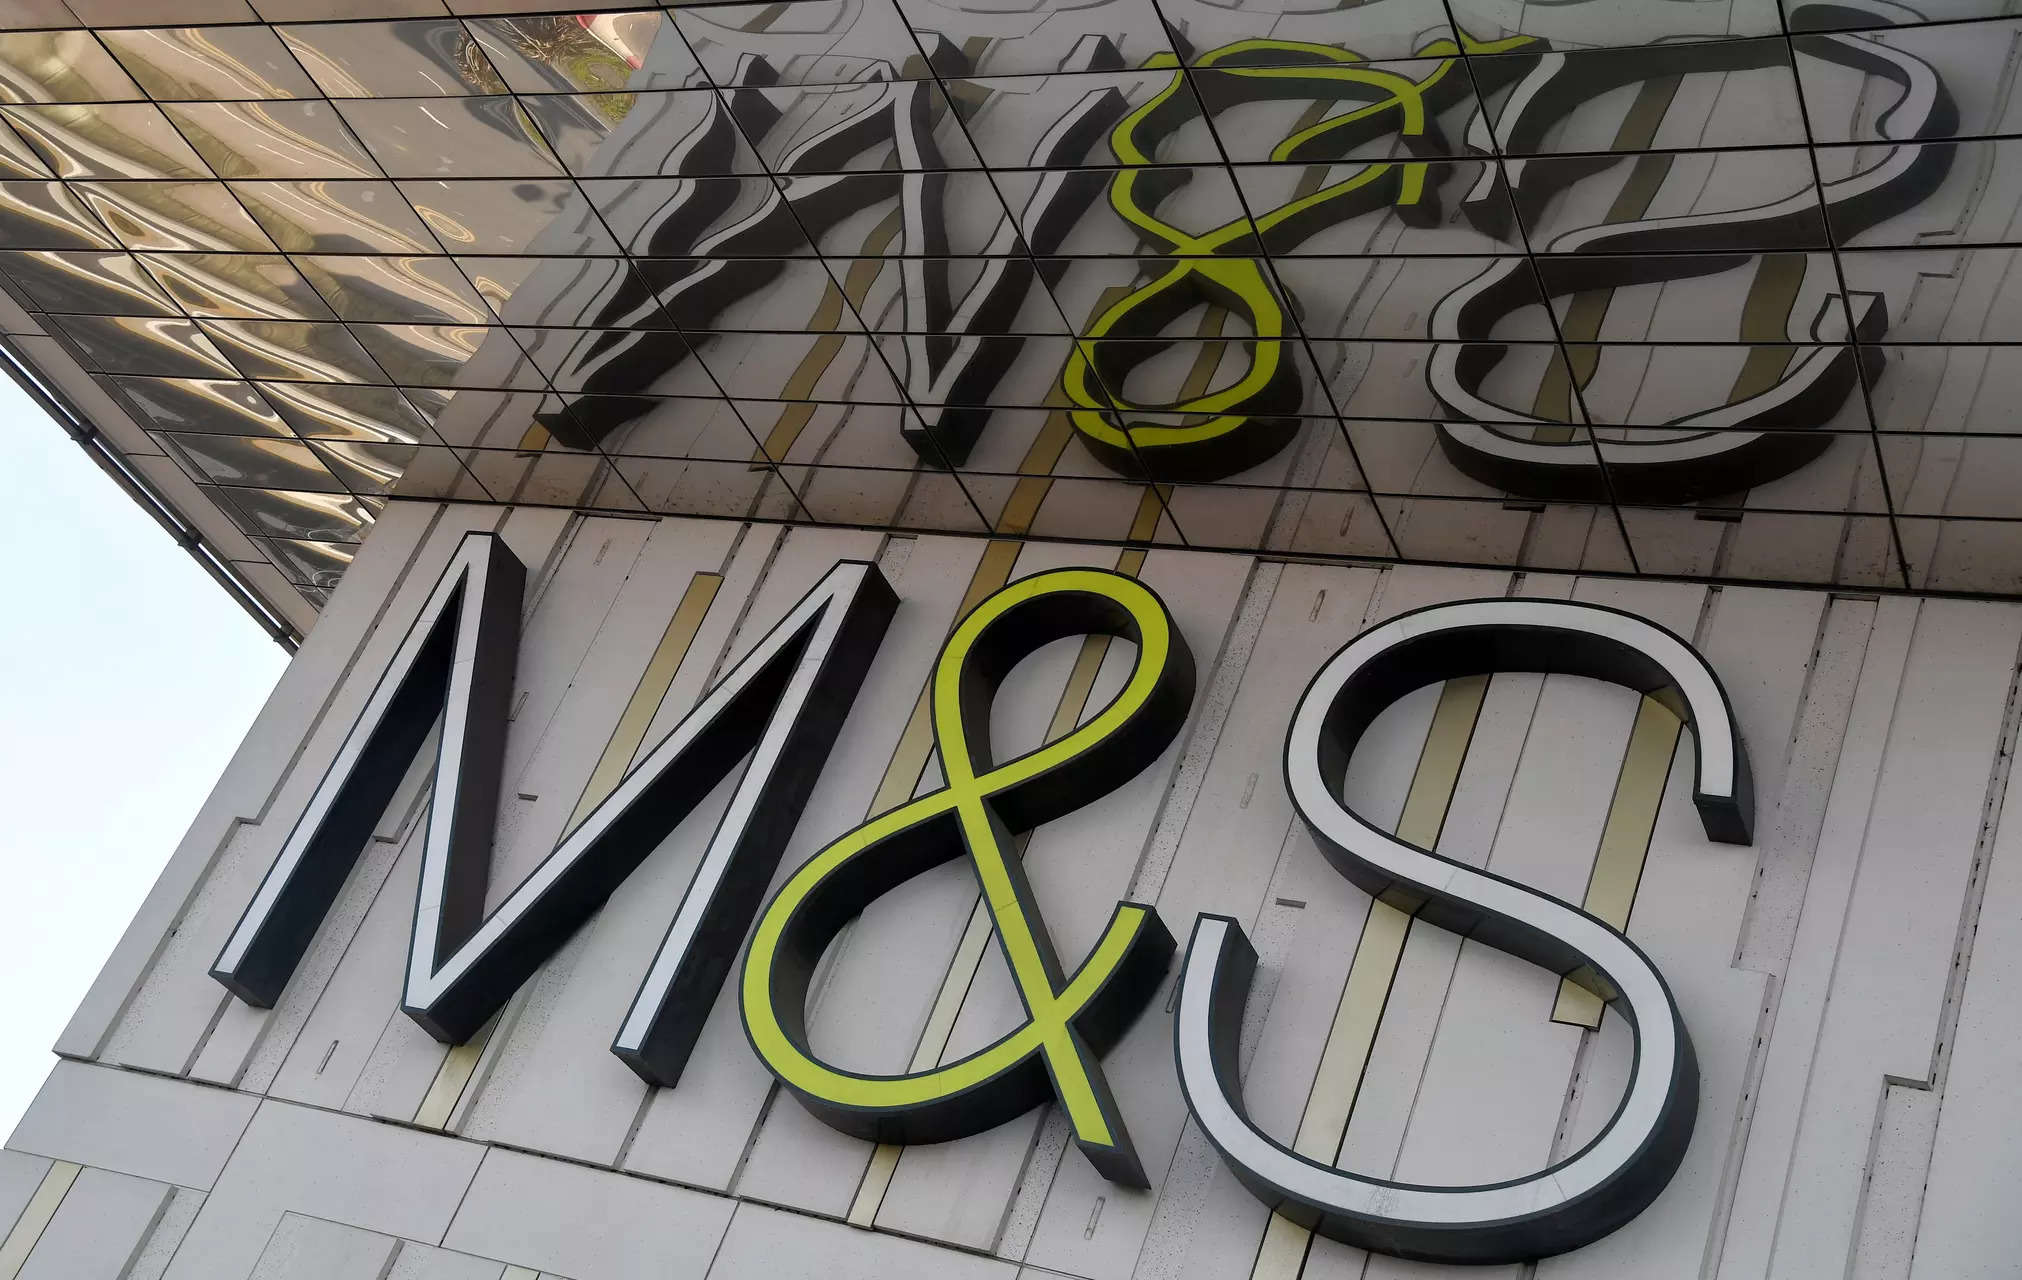 <p>In August, M&S raised its profit outlook on the back of strong trading and last month it rejoined Britain's FTSE 100 stock index after a four-year hiatus</p>